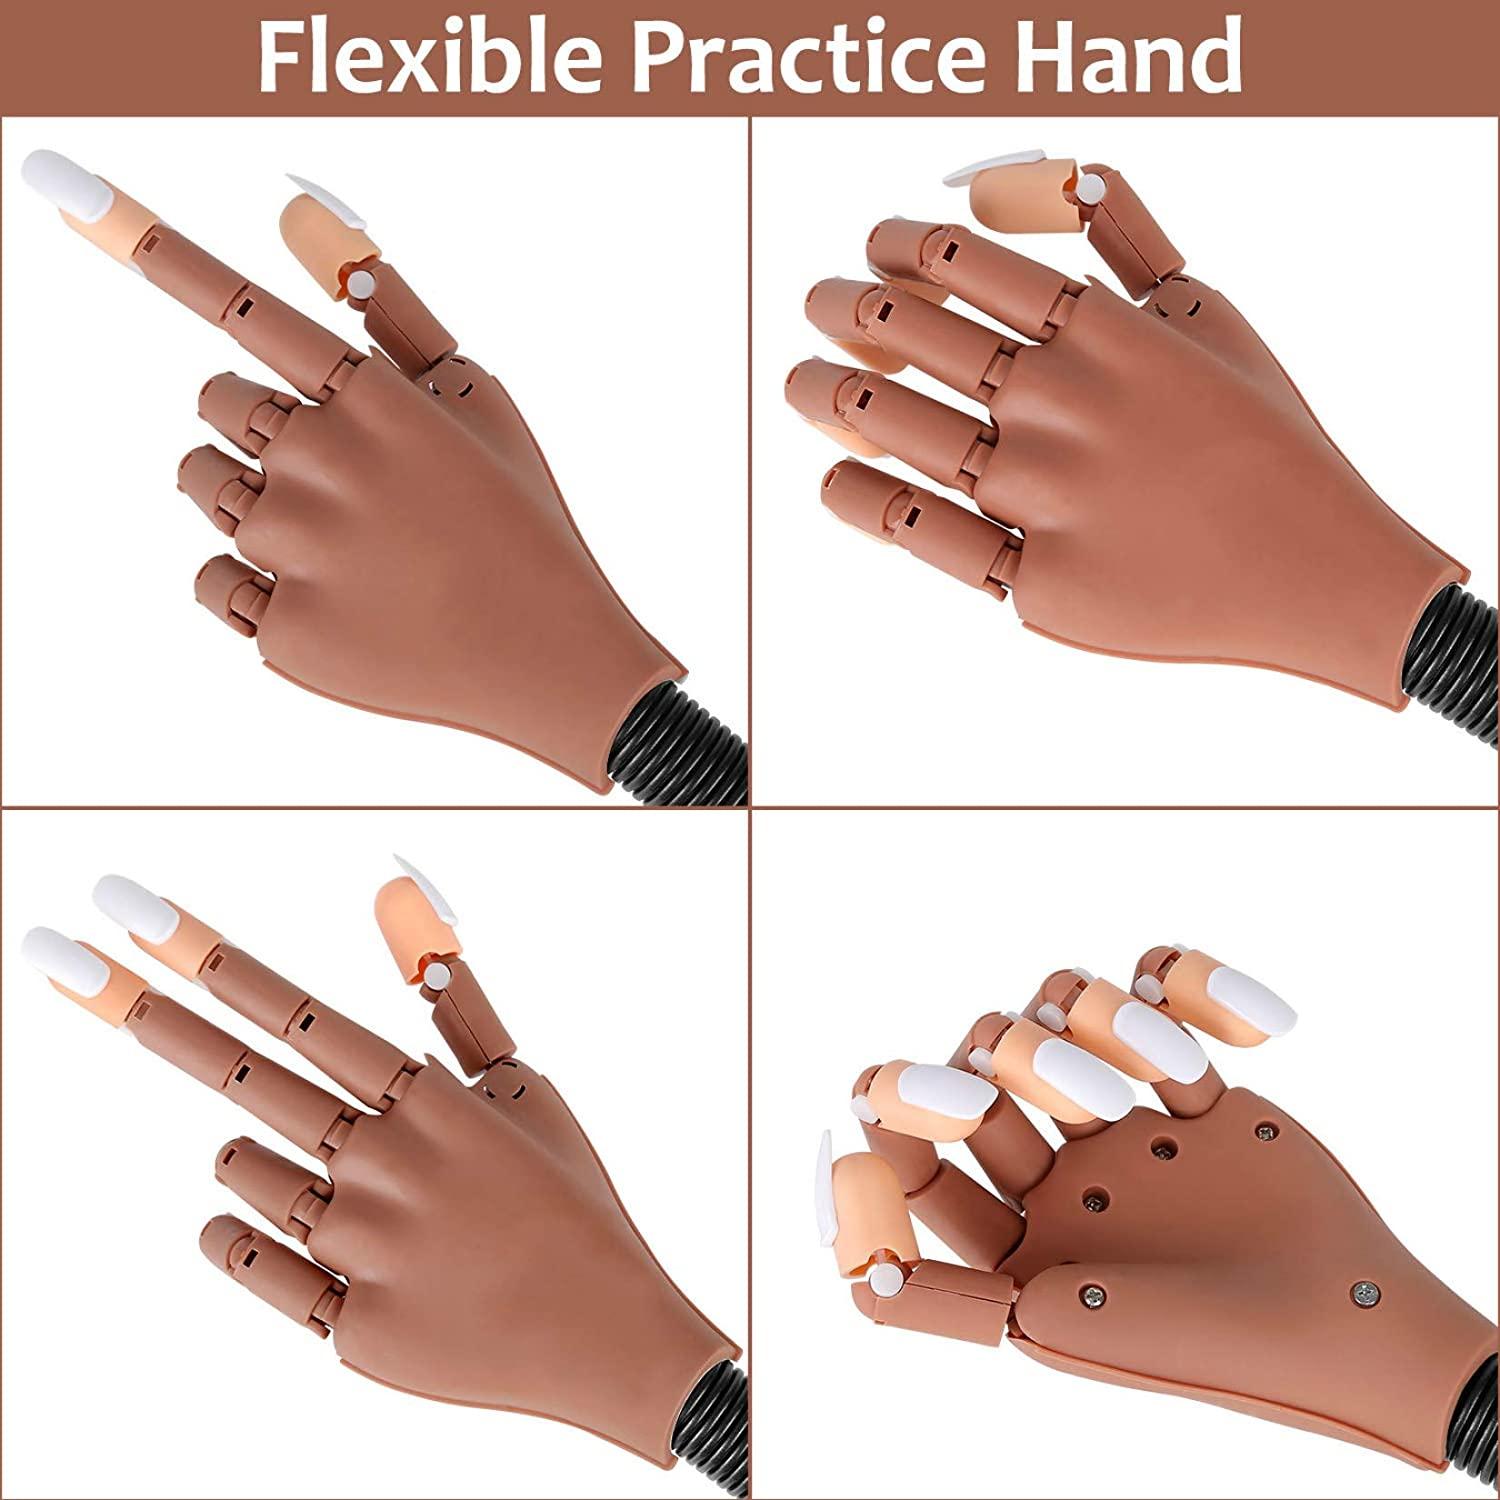 Practice Hand for Acrylic Nails, YaFex Flexible Fake Indonesia